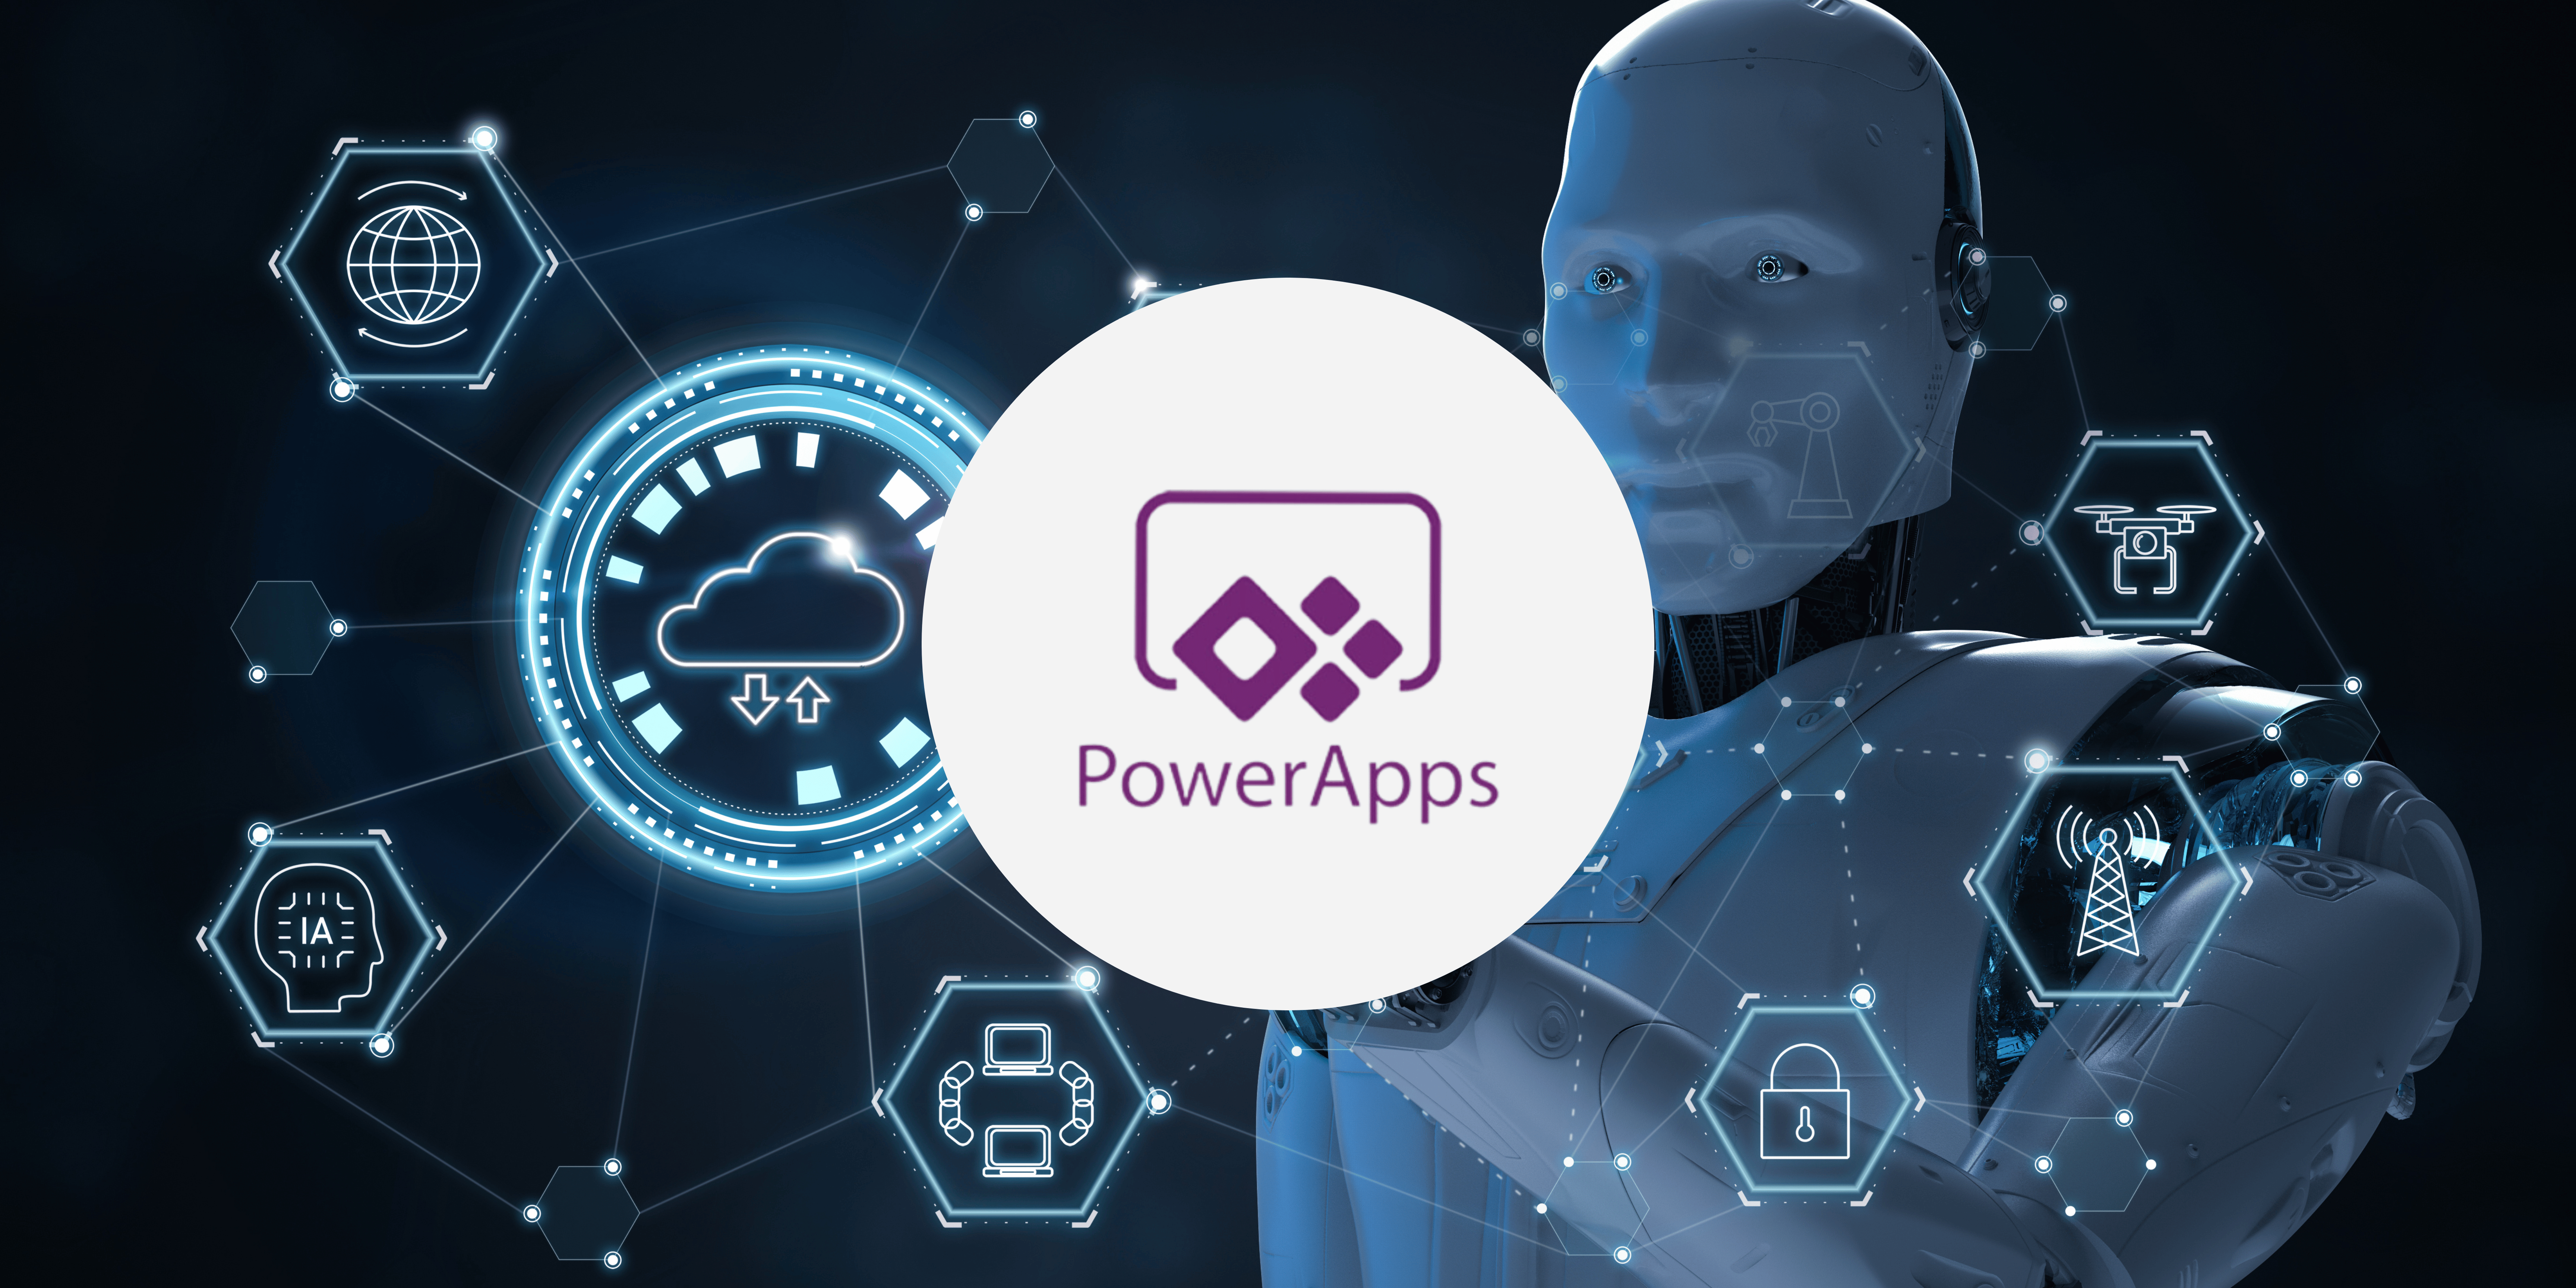 Let's create our own apps! What is Microsoft PowerApps? - Taiki's Memorandum